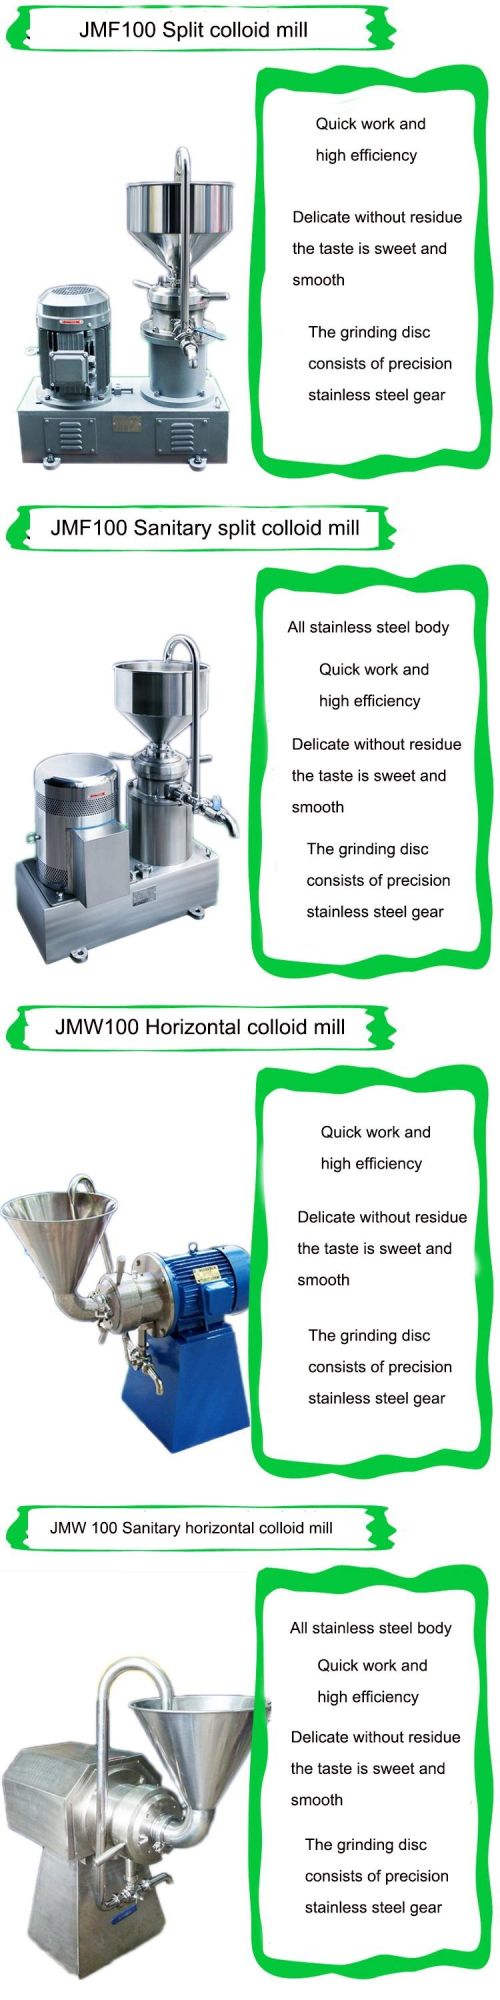 Cheap Price Commercial Automatic Grinder Nut Sesame Peanut Butter Making Machine